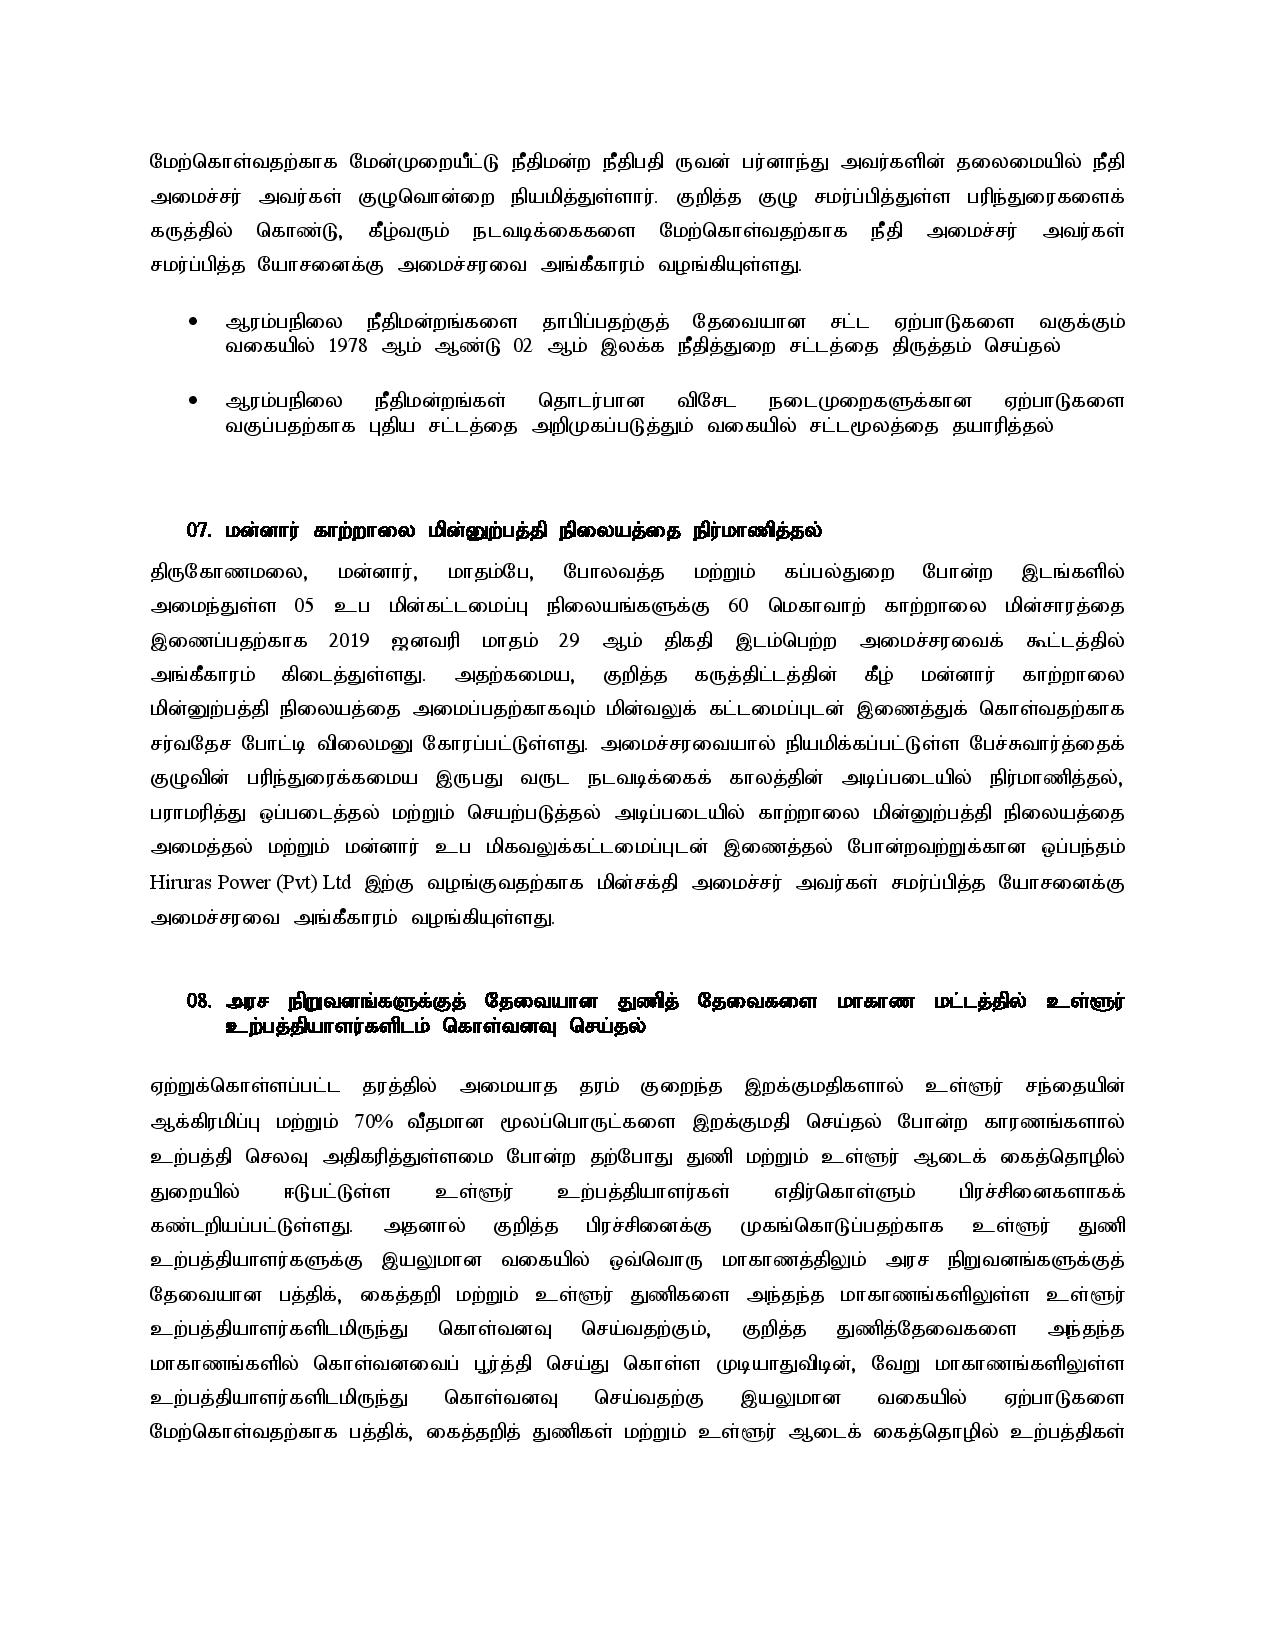 Cabinet Decisions 14.06.2021 Tamil page 003